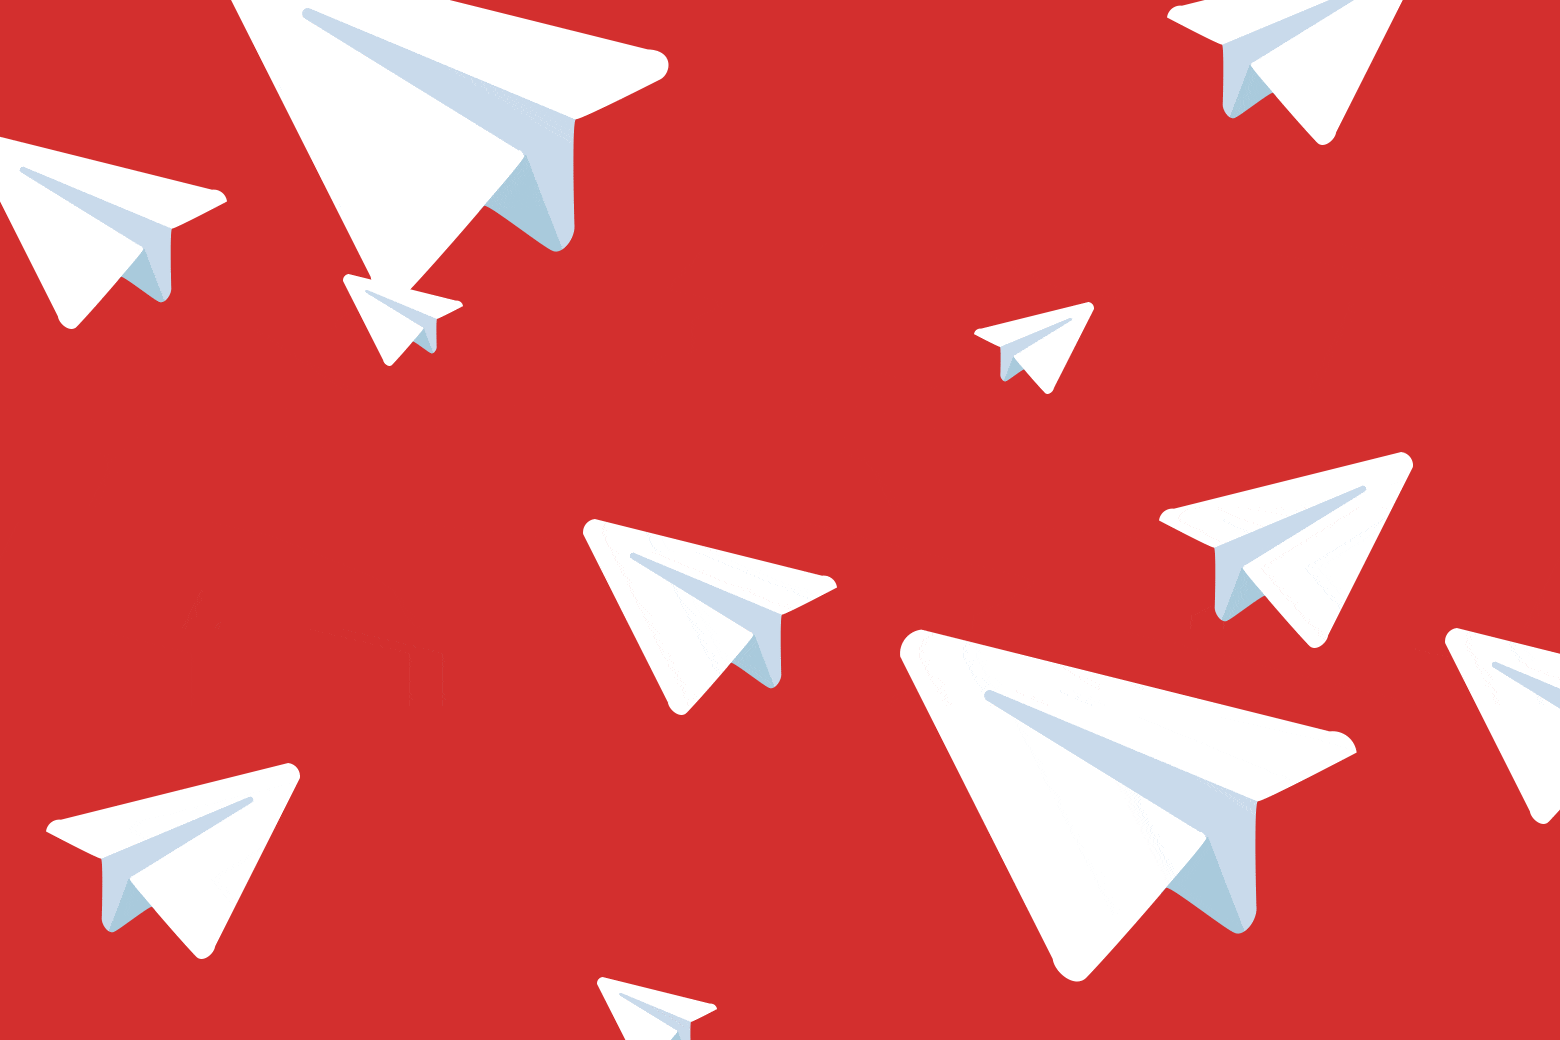 Telegram paper airplane logos against a red background.